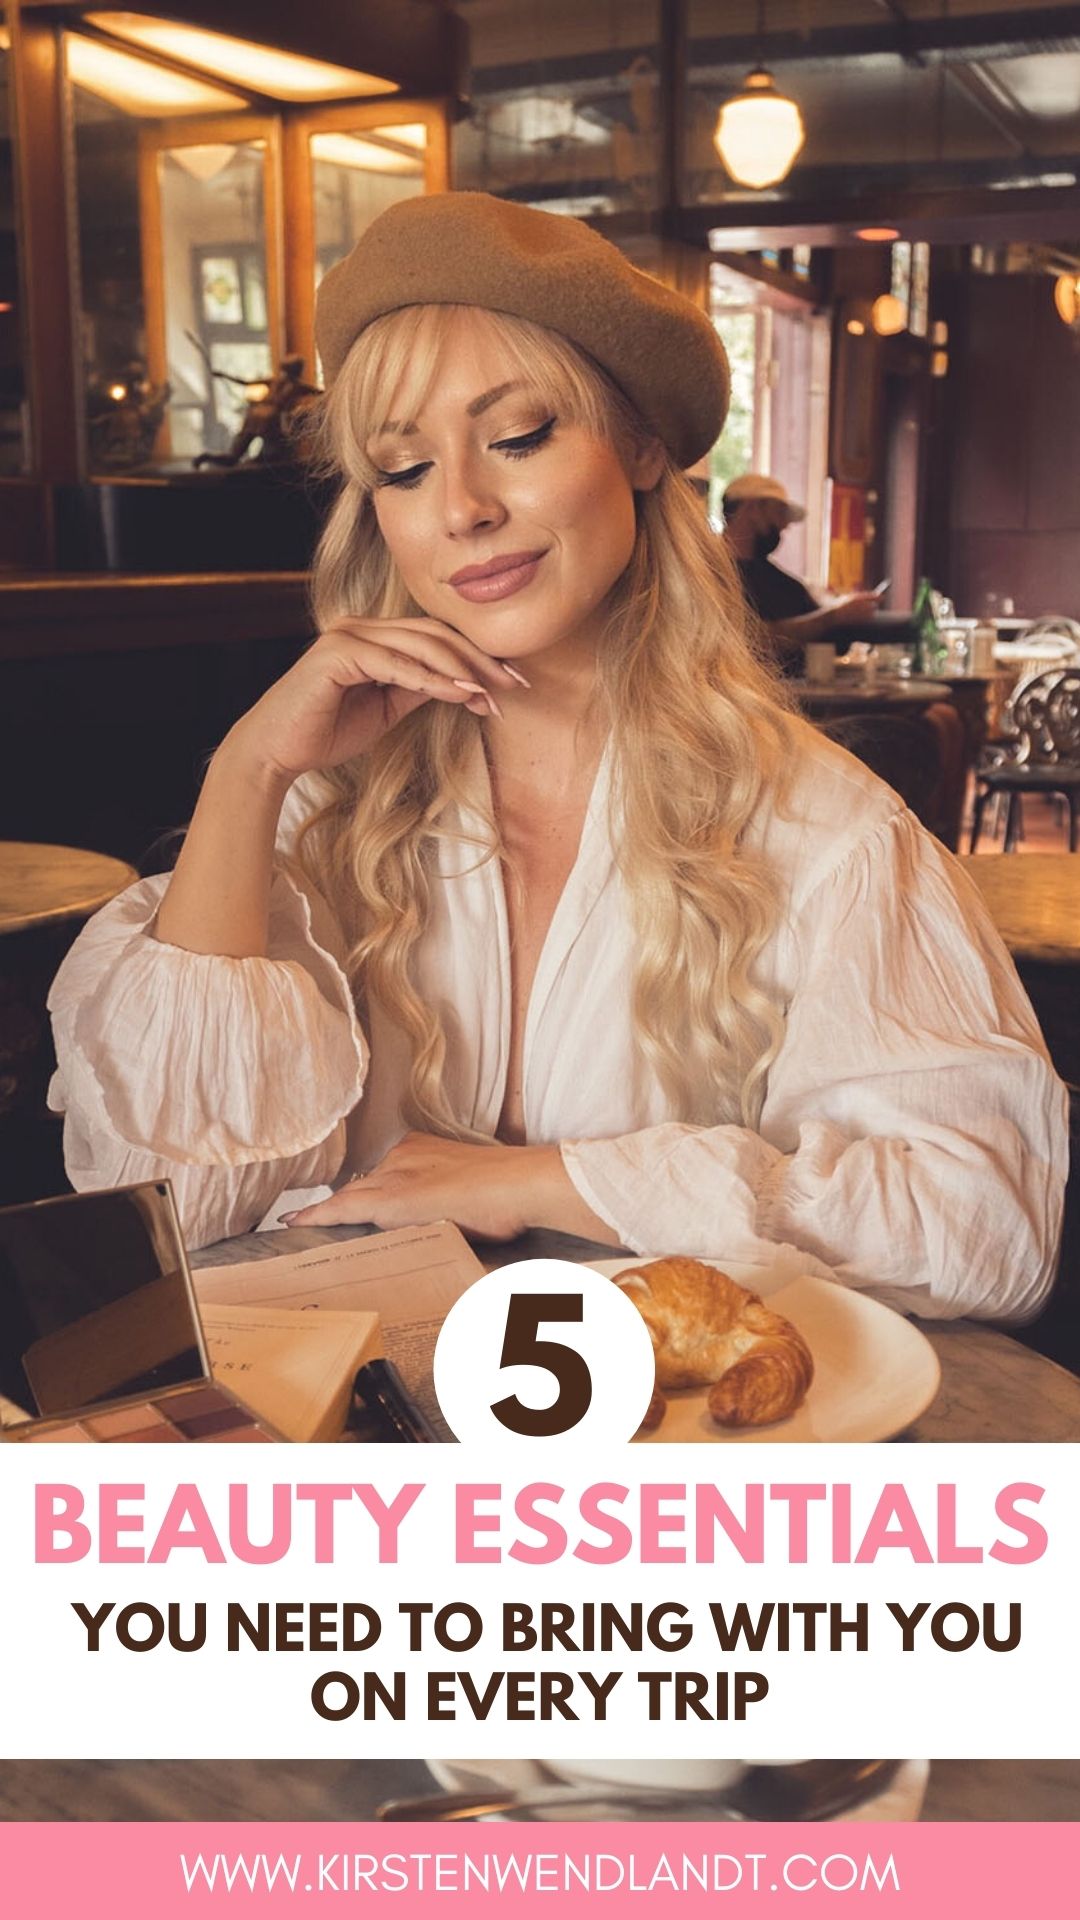 We all know beauty products can really weigh a suitcase down, and I've had to learn what's the best of the best in packable products to get me through trips from as short as a weekend away to month long expeditions. I wanted to put together this guide to share with you my top travel beauty essentials in hopes that I can help streamline your travel packing routine too. Plus read on to find out where you can get all your skincare and makeup with free shipping in Canada.